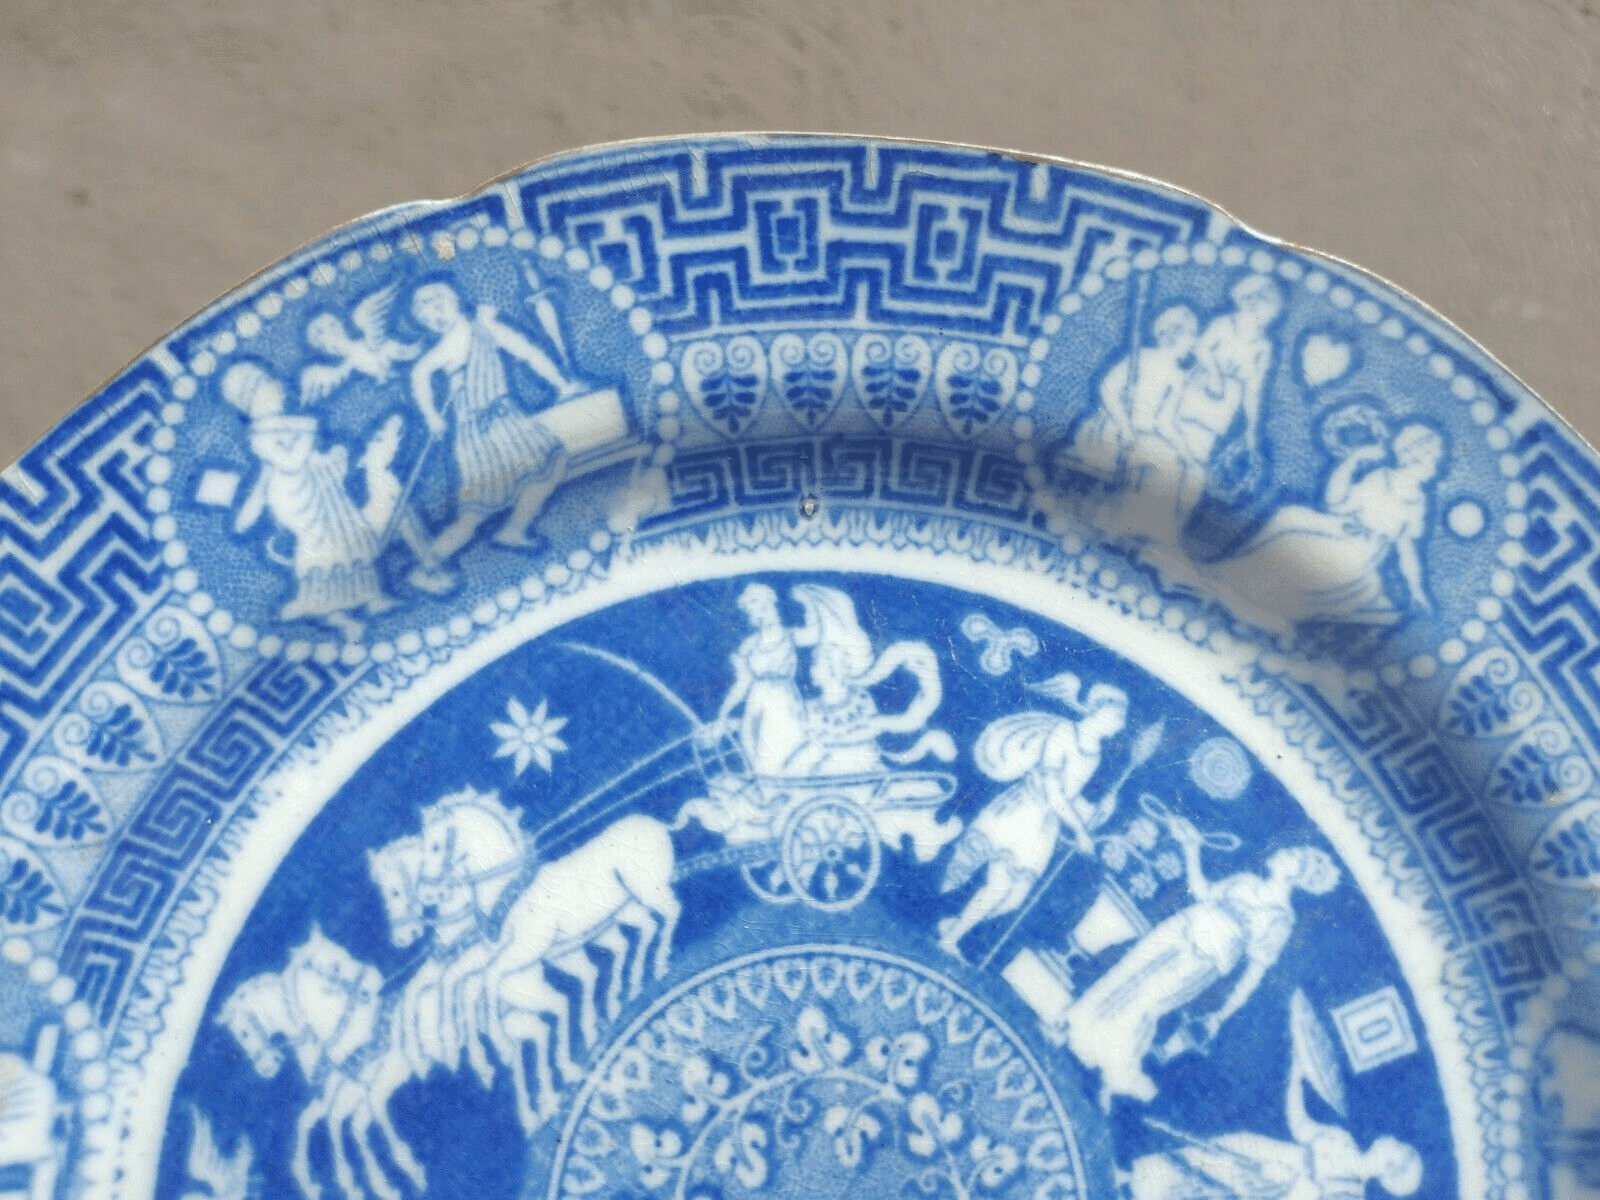 19th Century English Herculaneum Greek Neoclassical Antique Pottery Plate (2) - Tommy's Treasure